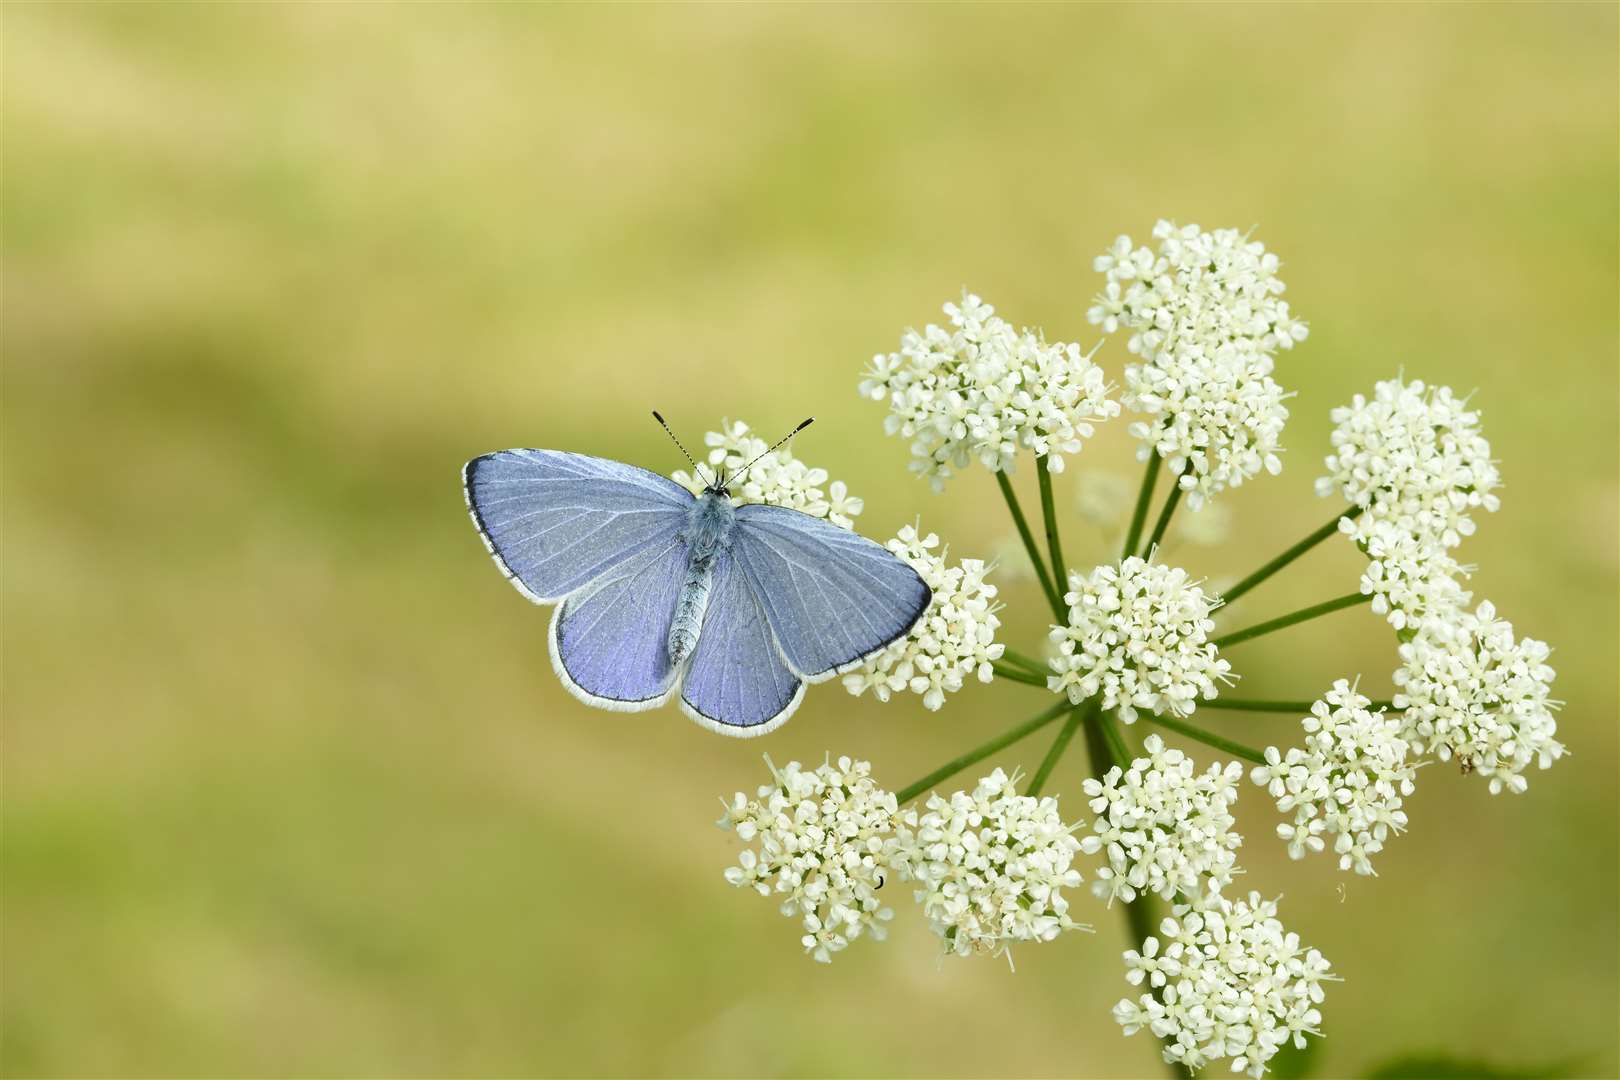 Holly blue numbers have increased from last year and over the long term (Iain H Leach/Butterfly Conservation/PA)